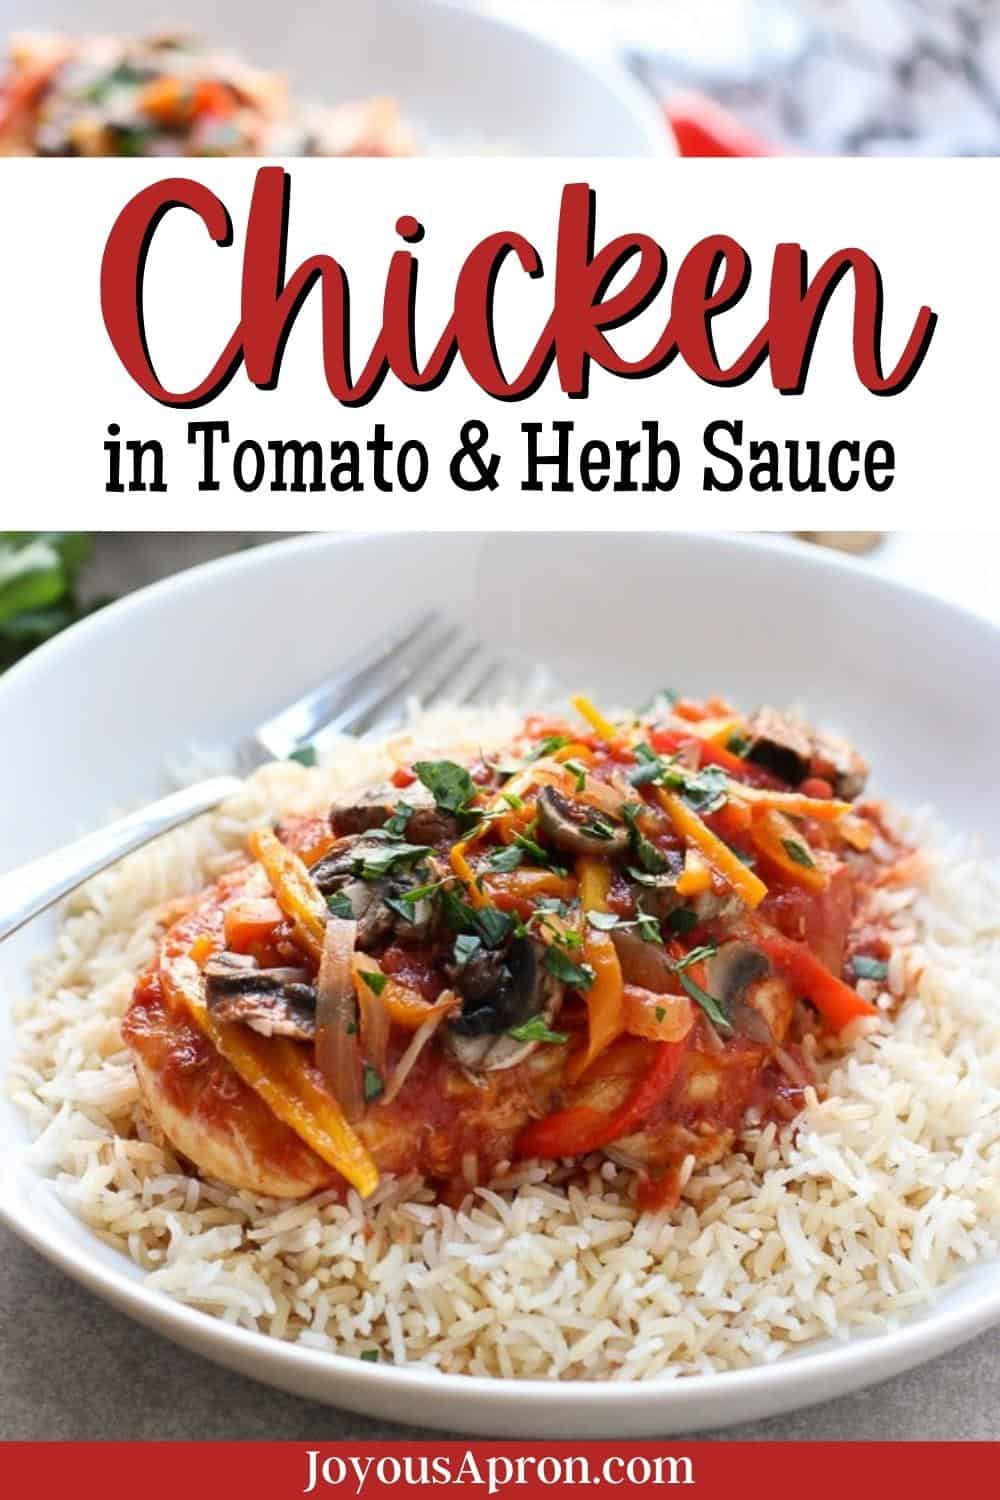 Slow Cooker Chicken in Tomato and Herb Sauce - A healthy, easy crockpot meal! Using a slow cooker, chicken breast is cooked in an herb and white wine infused tomato sauce, combined with bell peppers, onions and mushrooms via @joyousapron